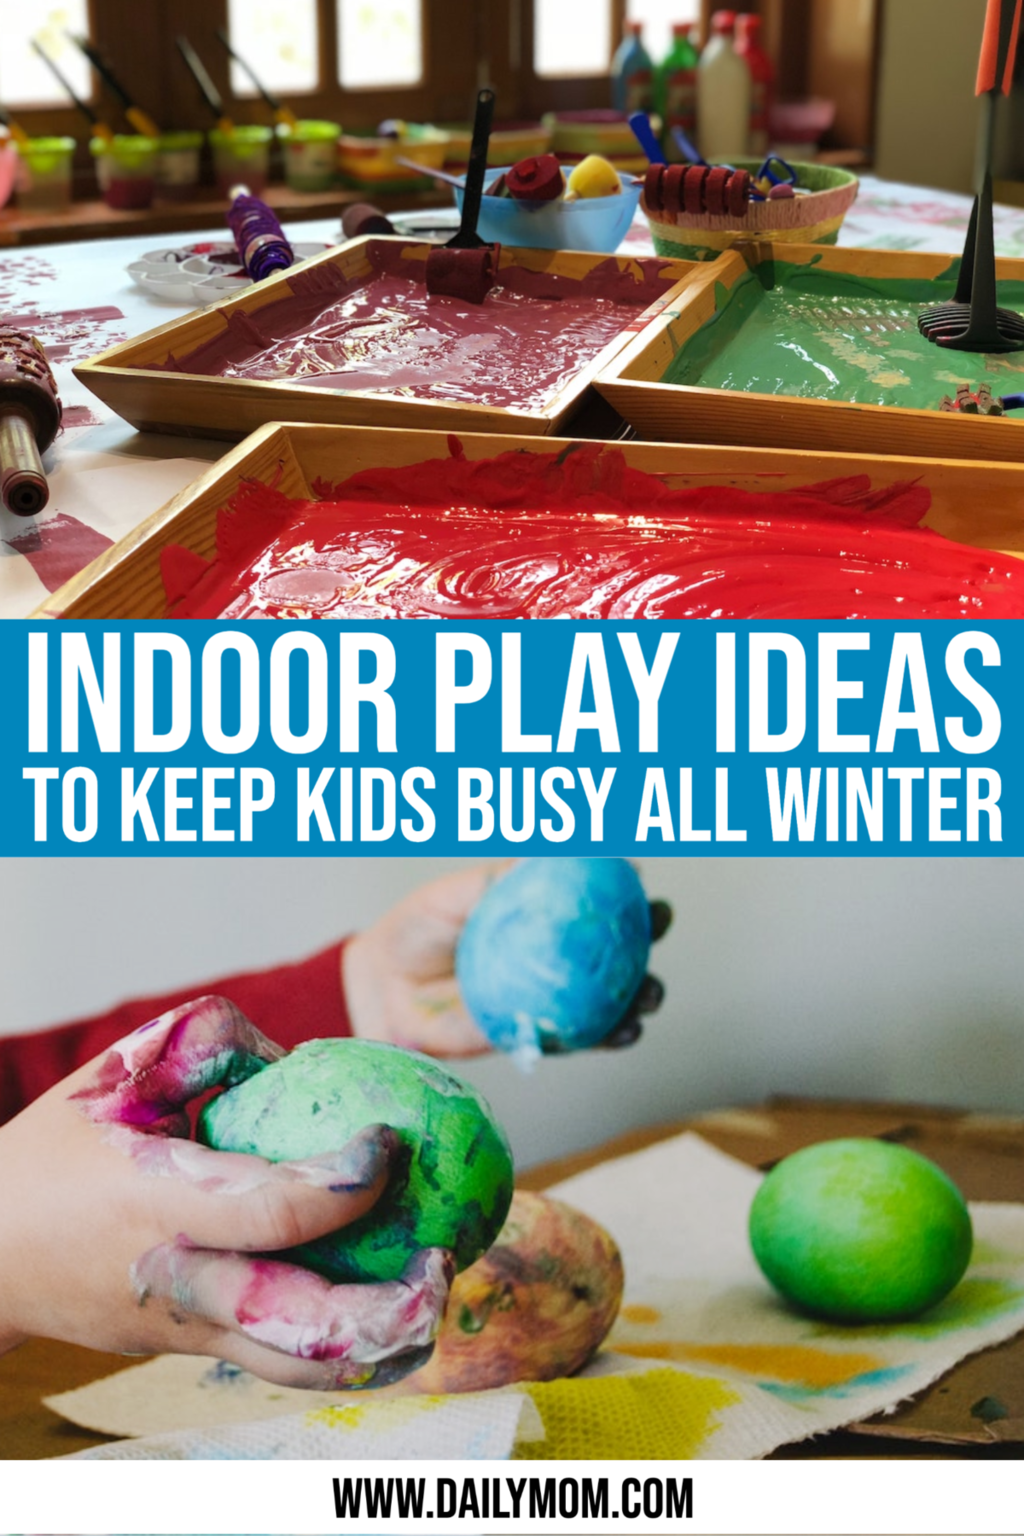 15 Simple Indoor Play For Kids To Stay Busy All Winter